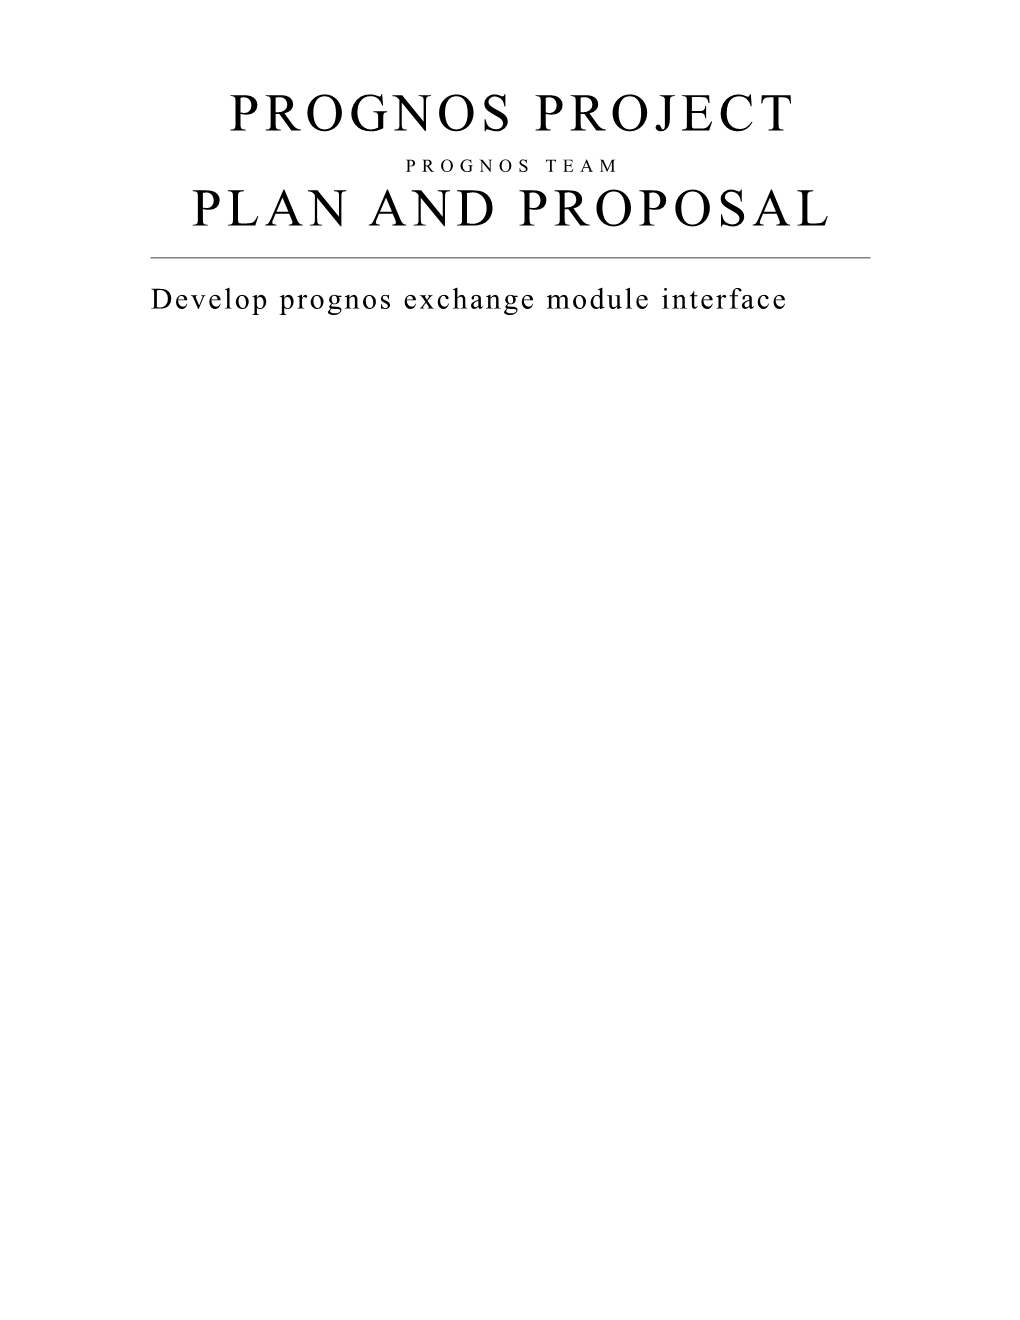 PROGNOS Project Plan and Proposal